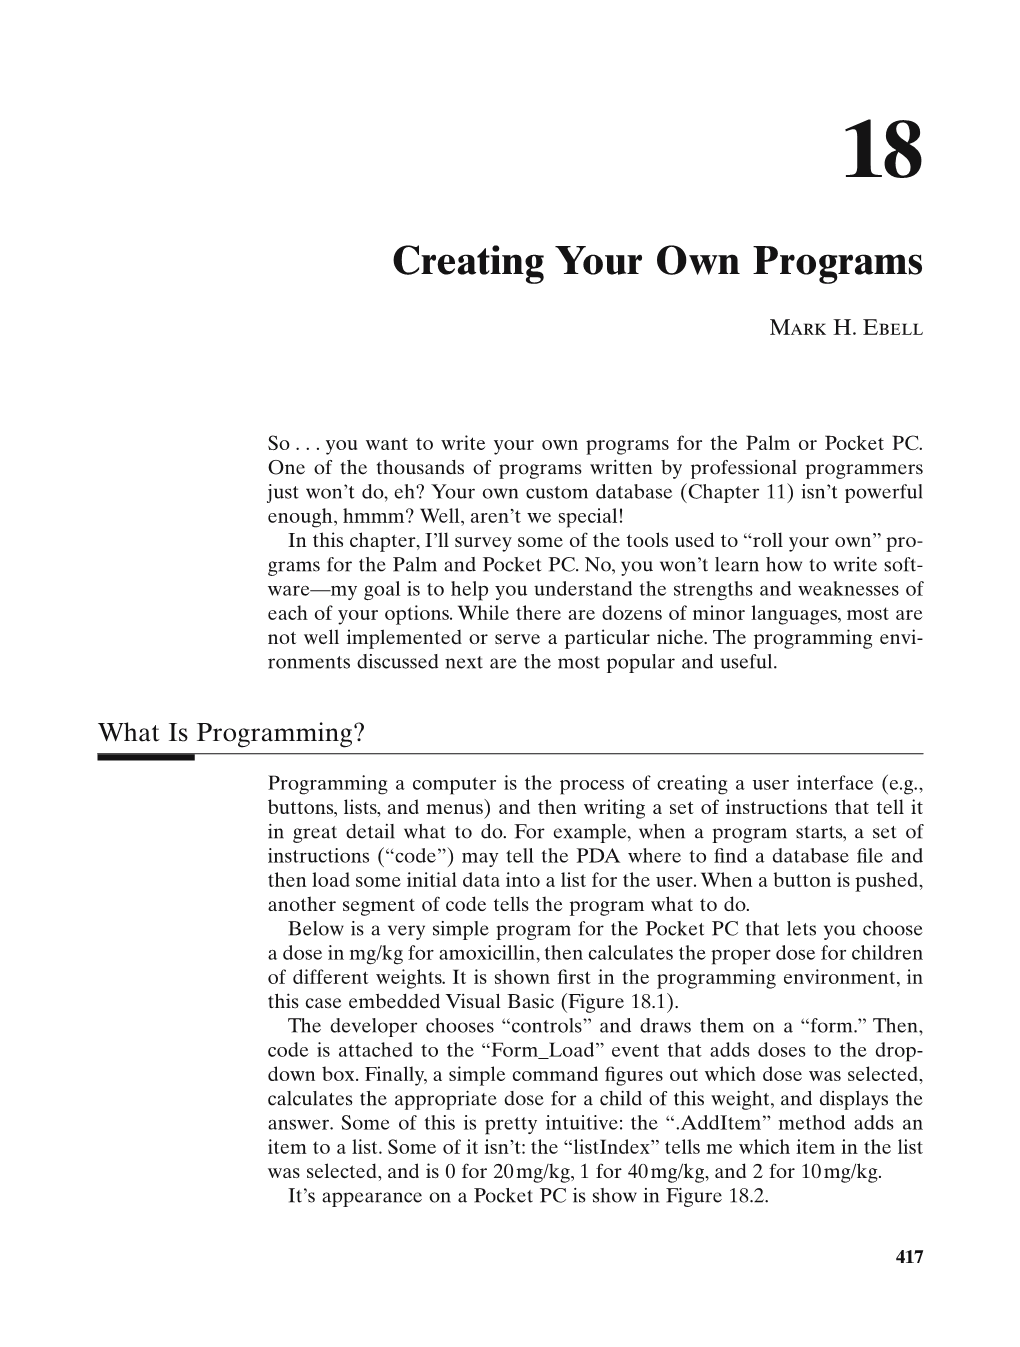 Creating Your Own Programs